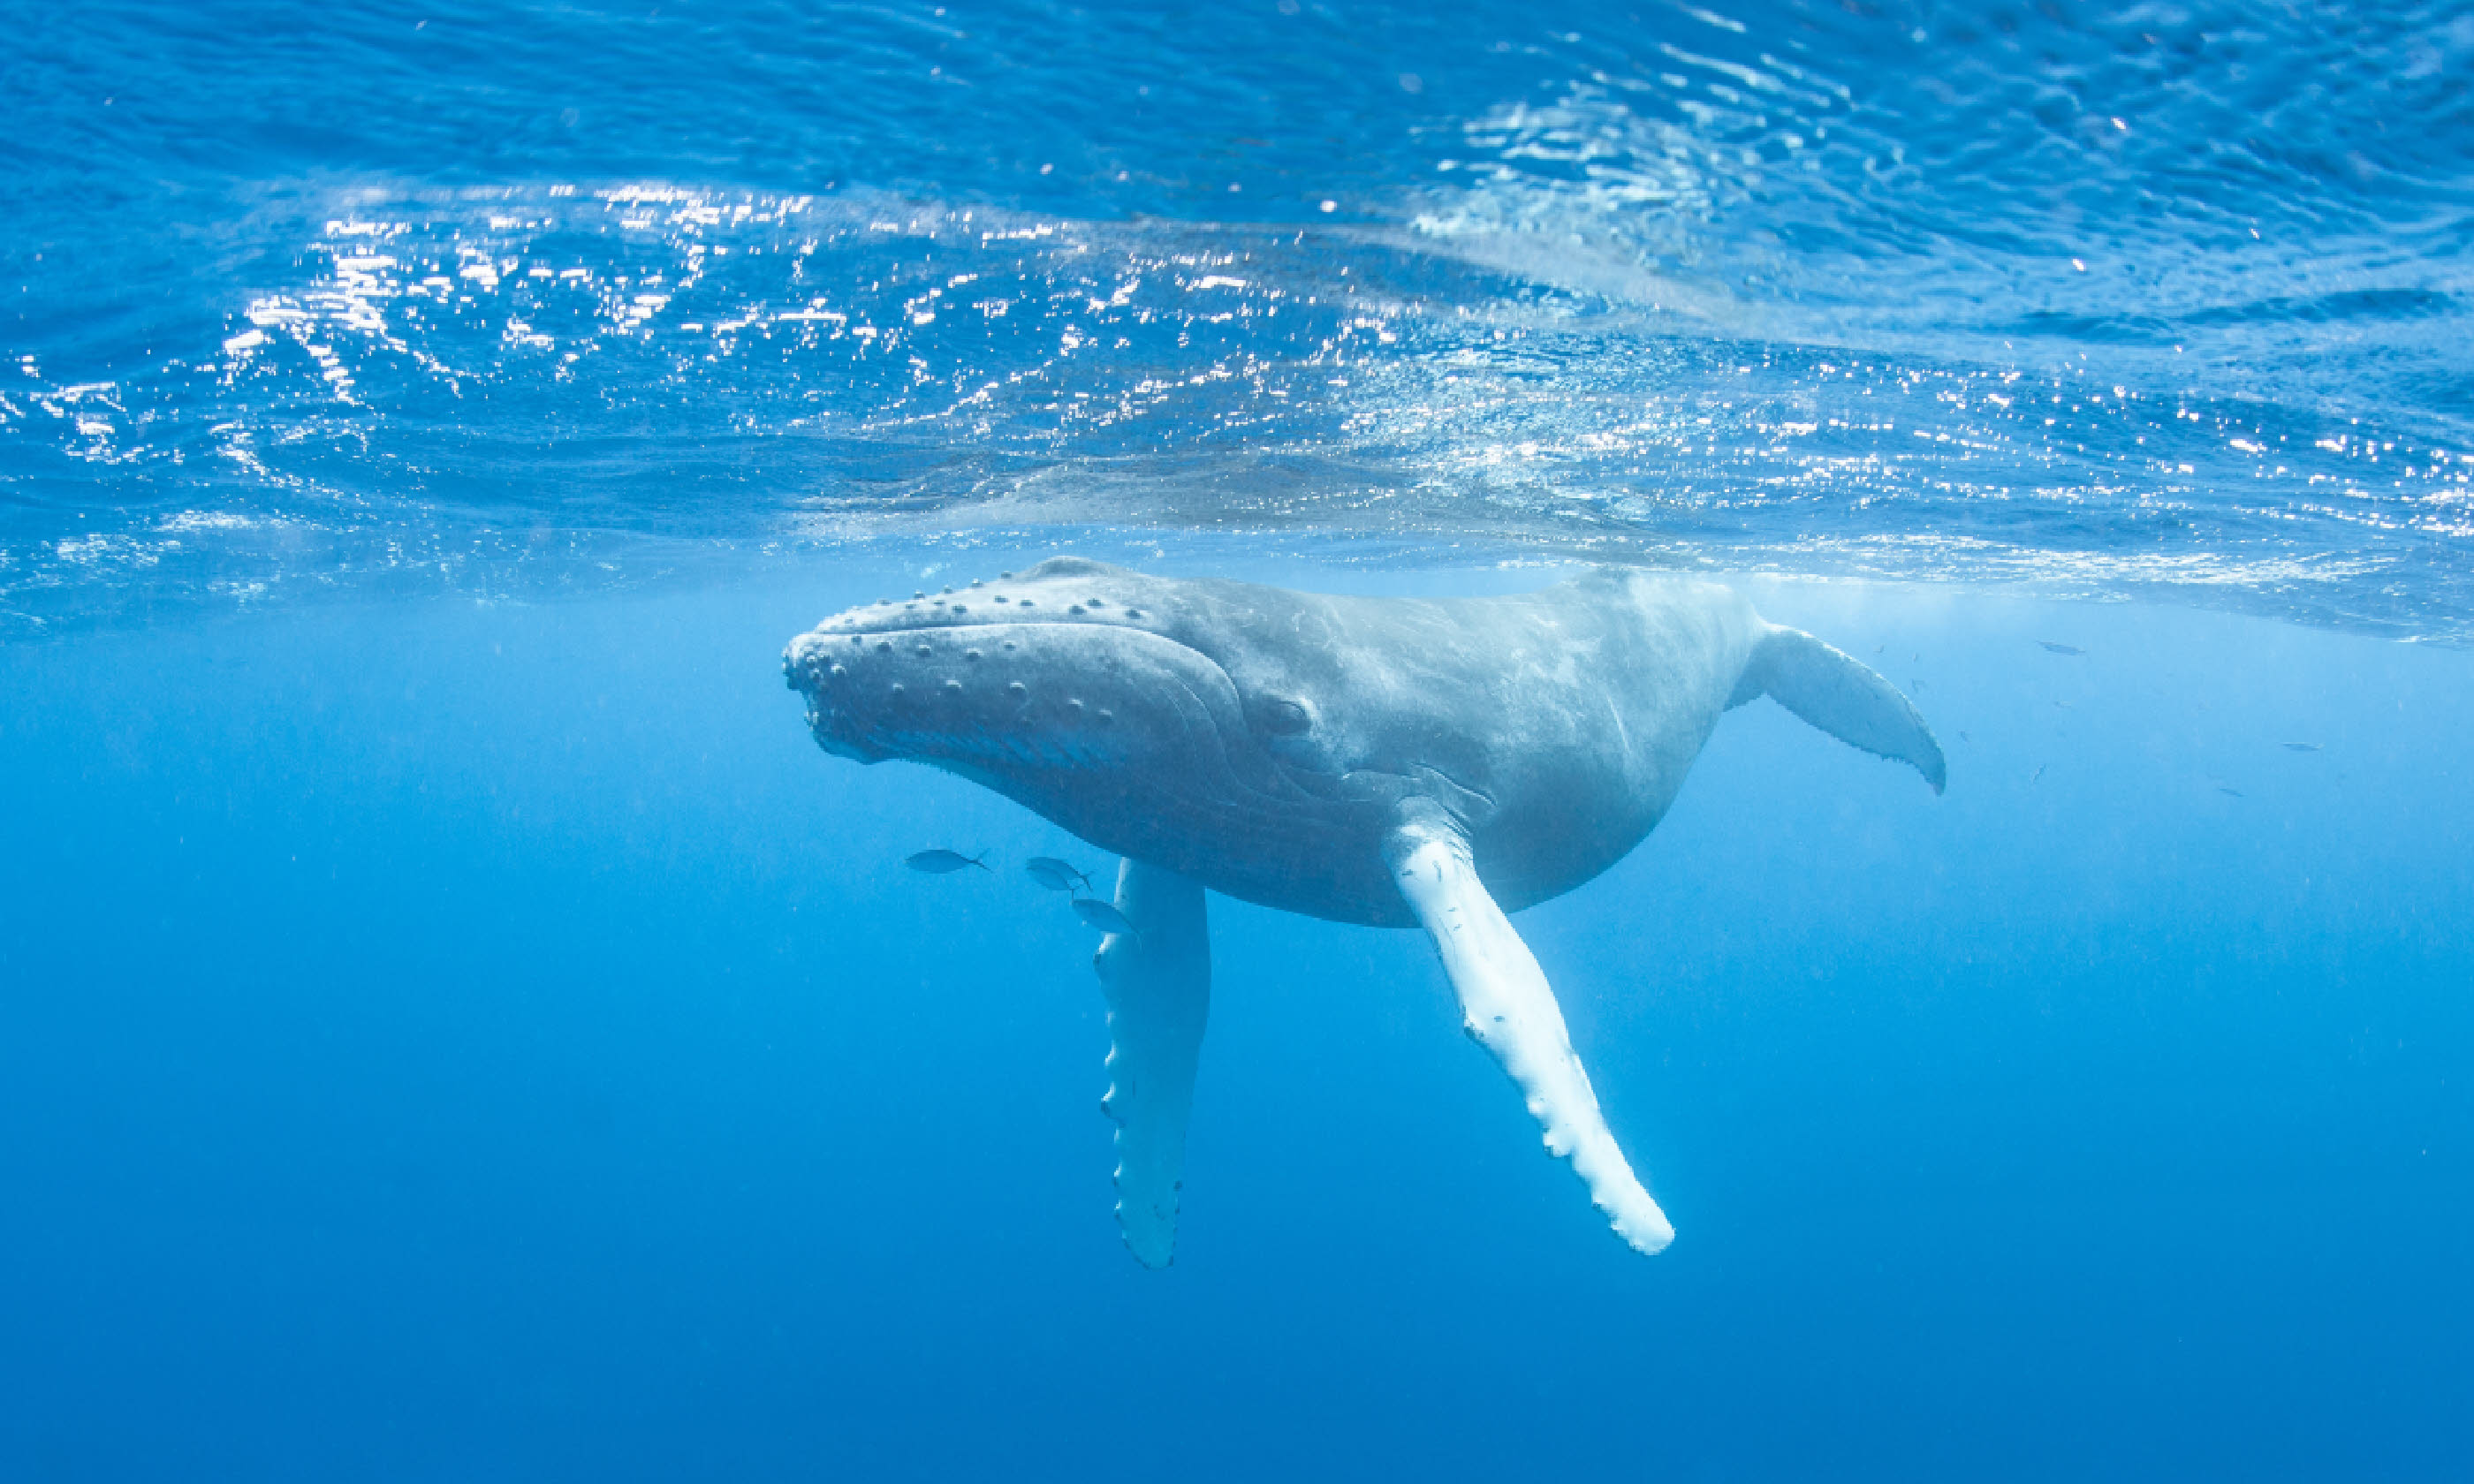 A young Humpback whale swims at the surface of the Caribbean Sea (Shutterstock)